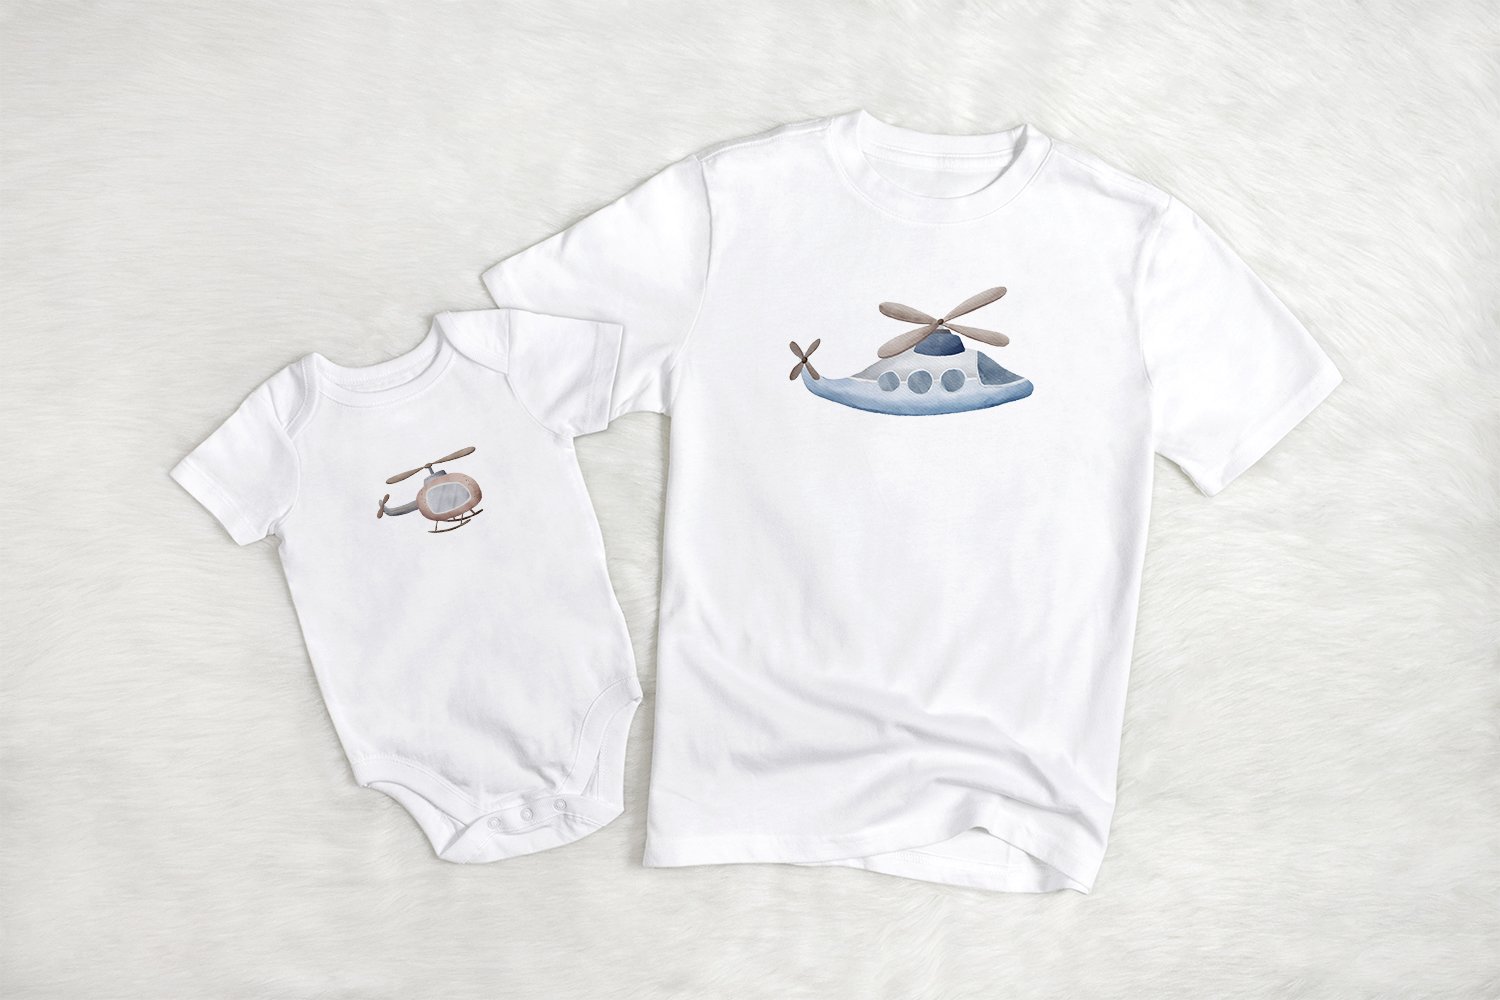 So cute clothes for children with nice airplane print.